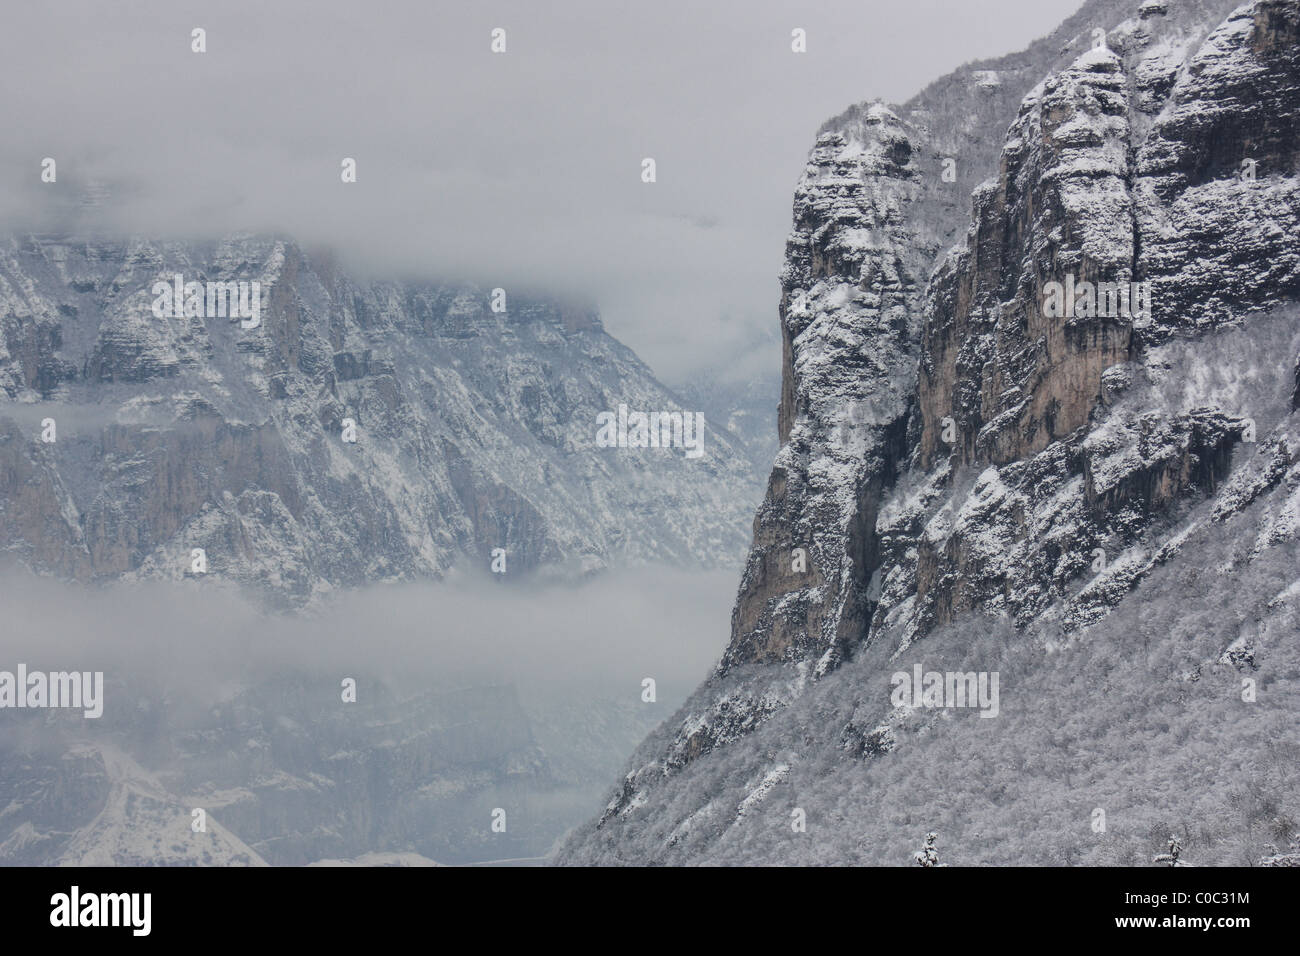 Mountains hidden in clouds, Trentino, Italy Stock Photo